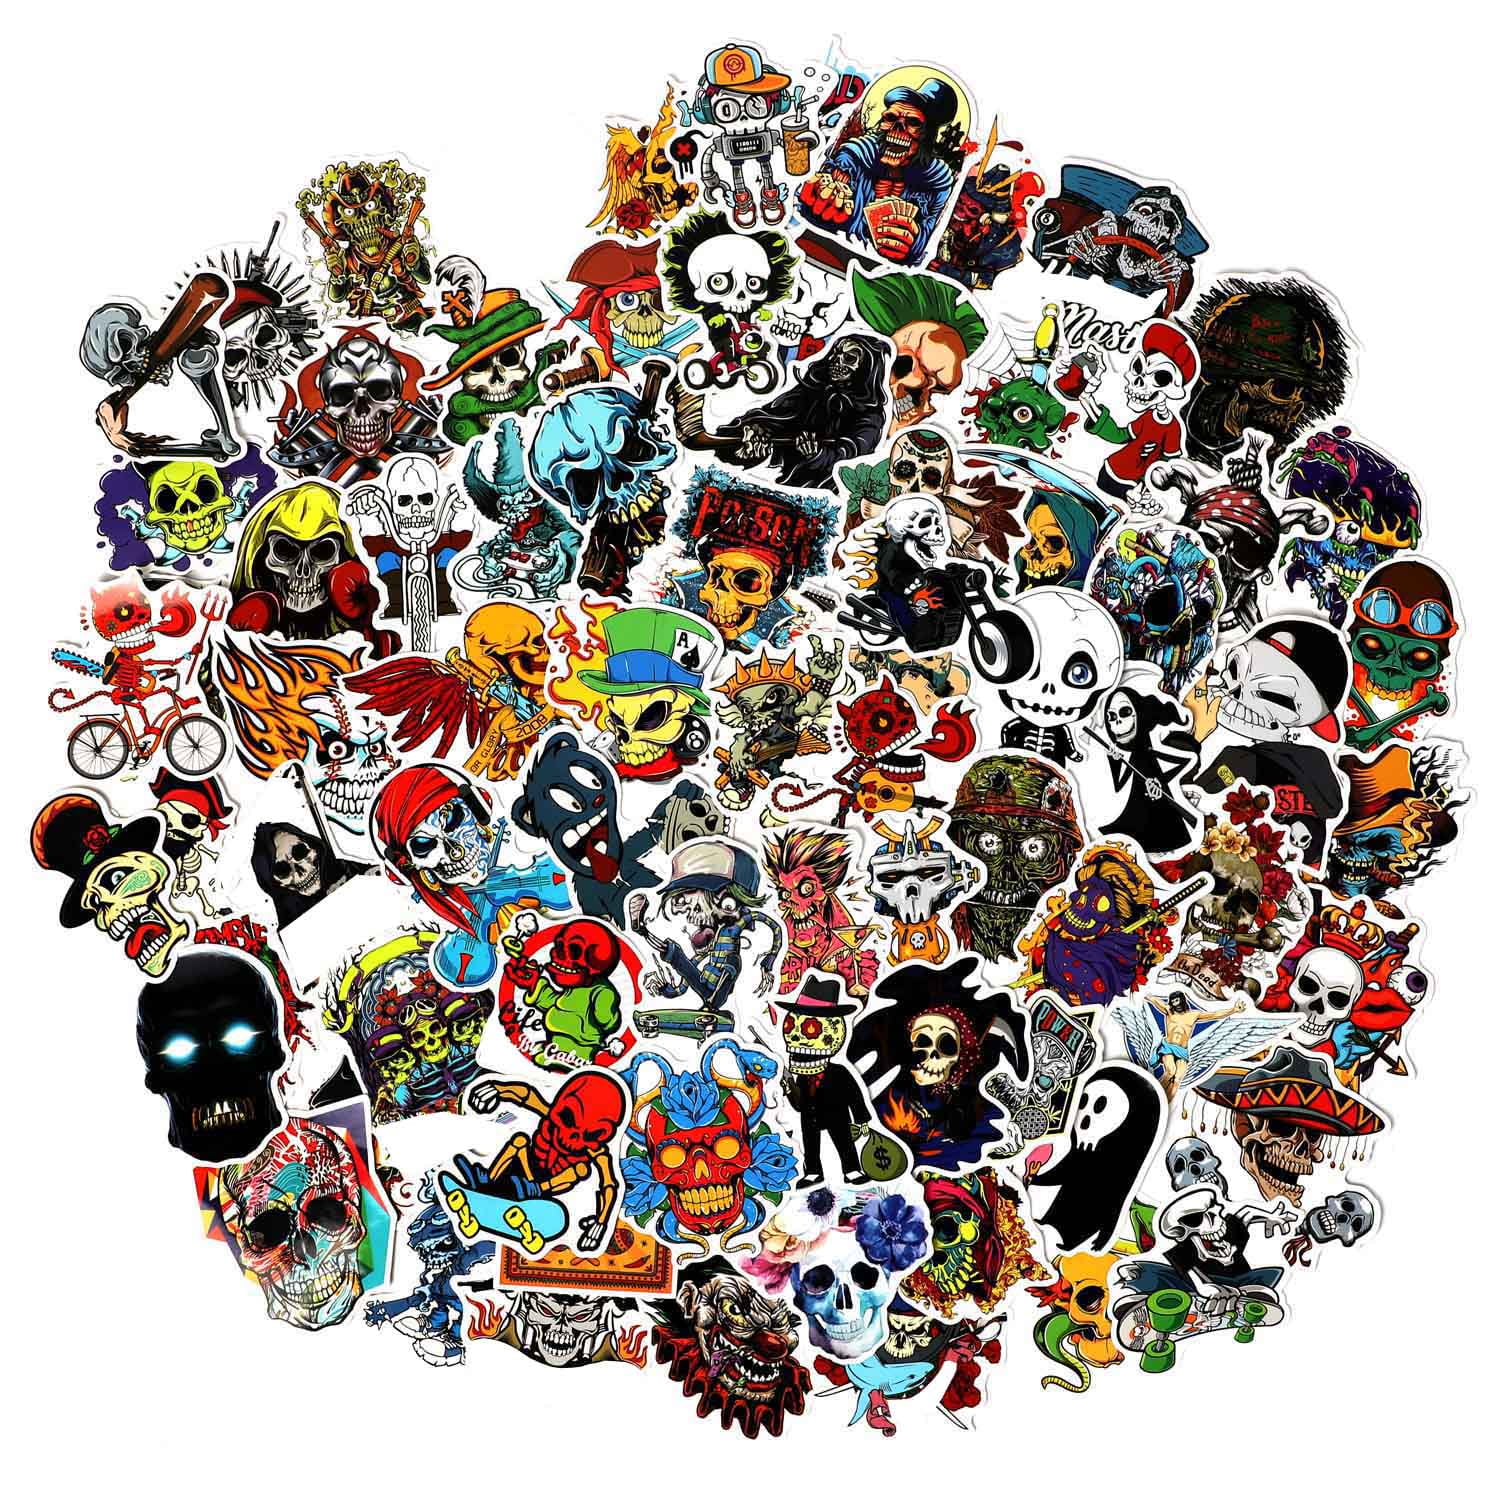 100pcs Stickers Motorcycle Skateboard Decal luggage sticker bomb pack US SELLER 